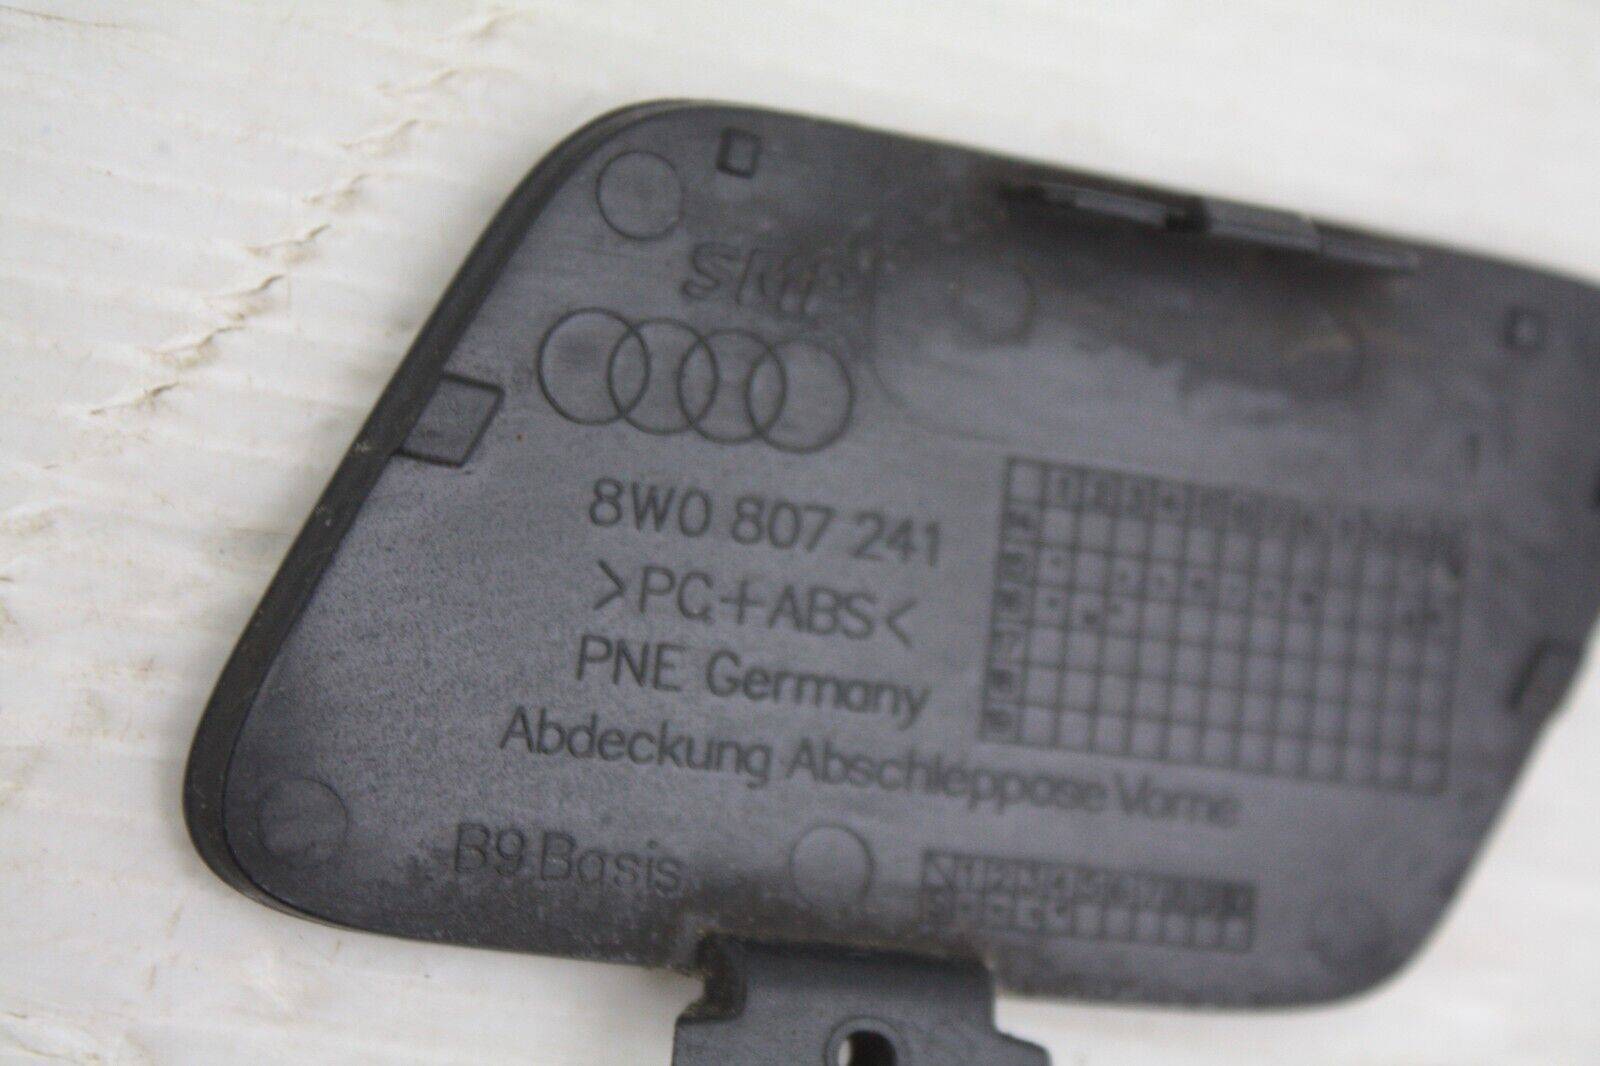 Audi-A4-B9-Saloon-Front-Bumper-Tow-Cover-2015-to-2018-8W0807241-Genuine-175829440258-7